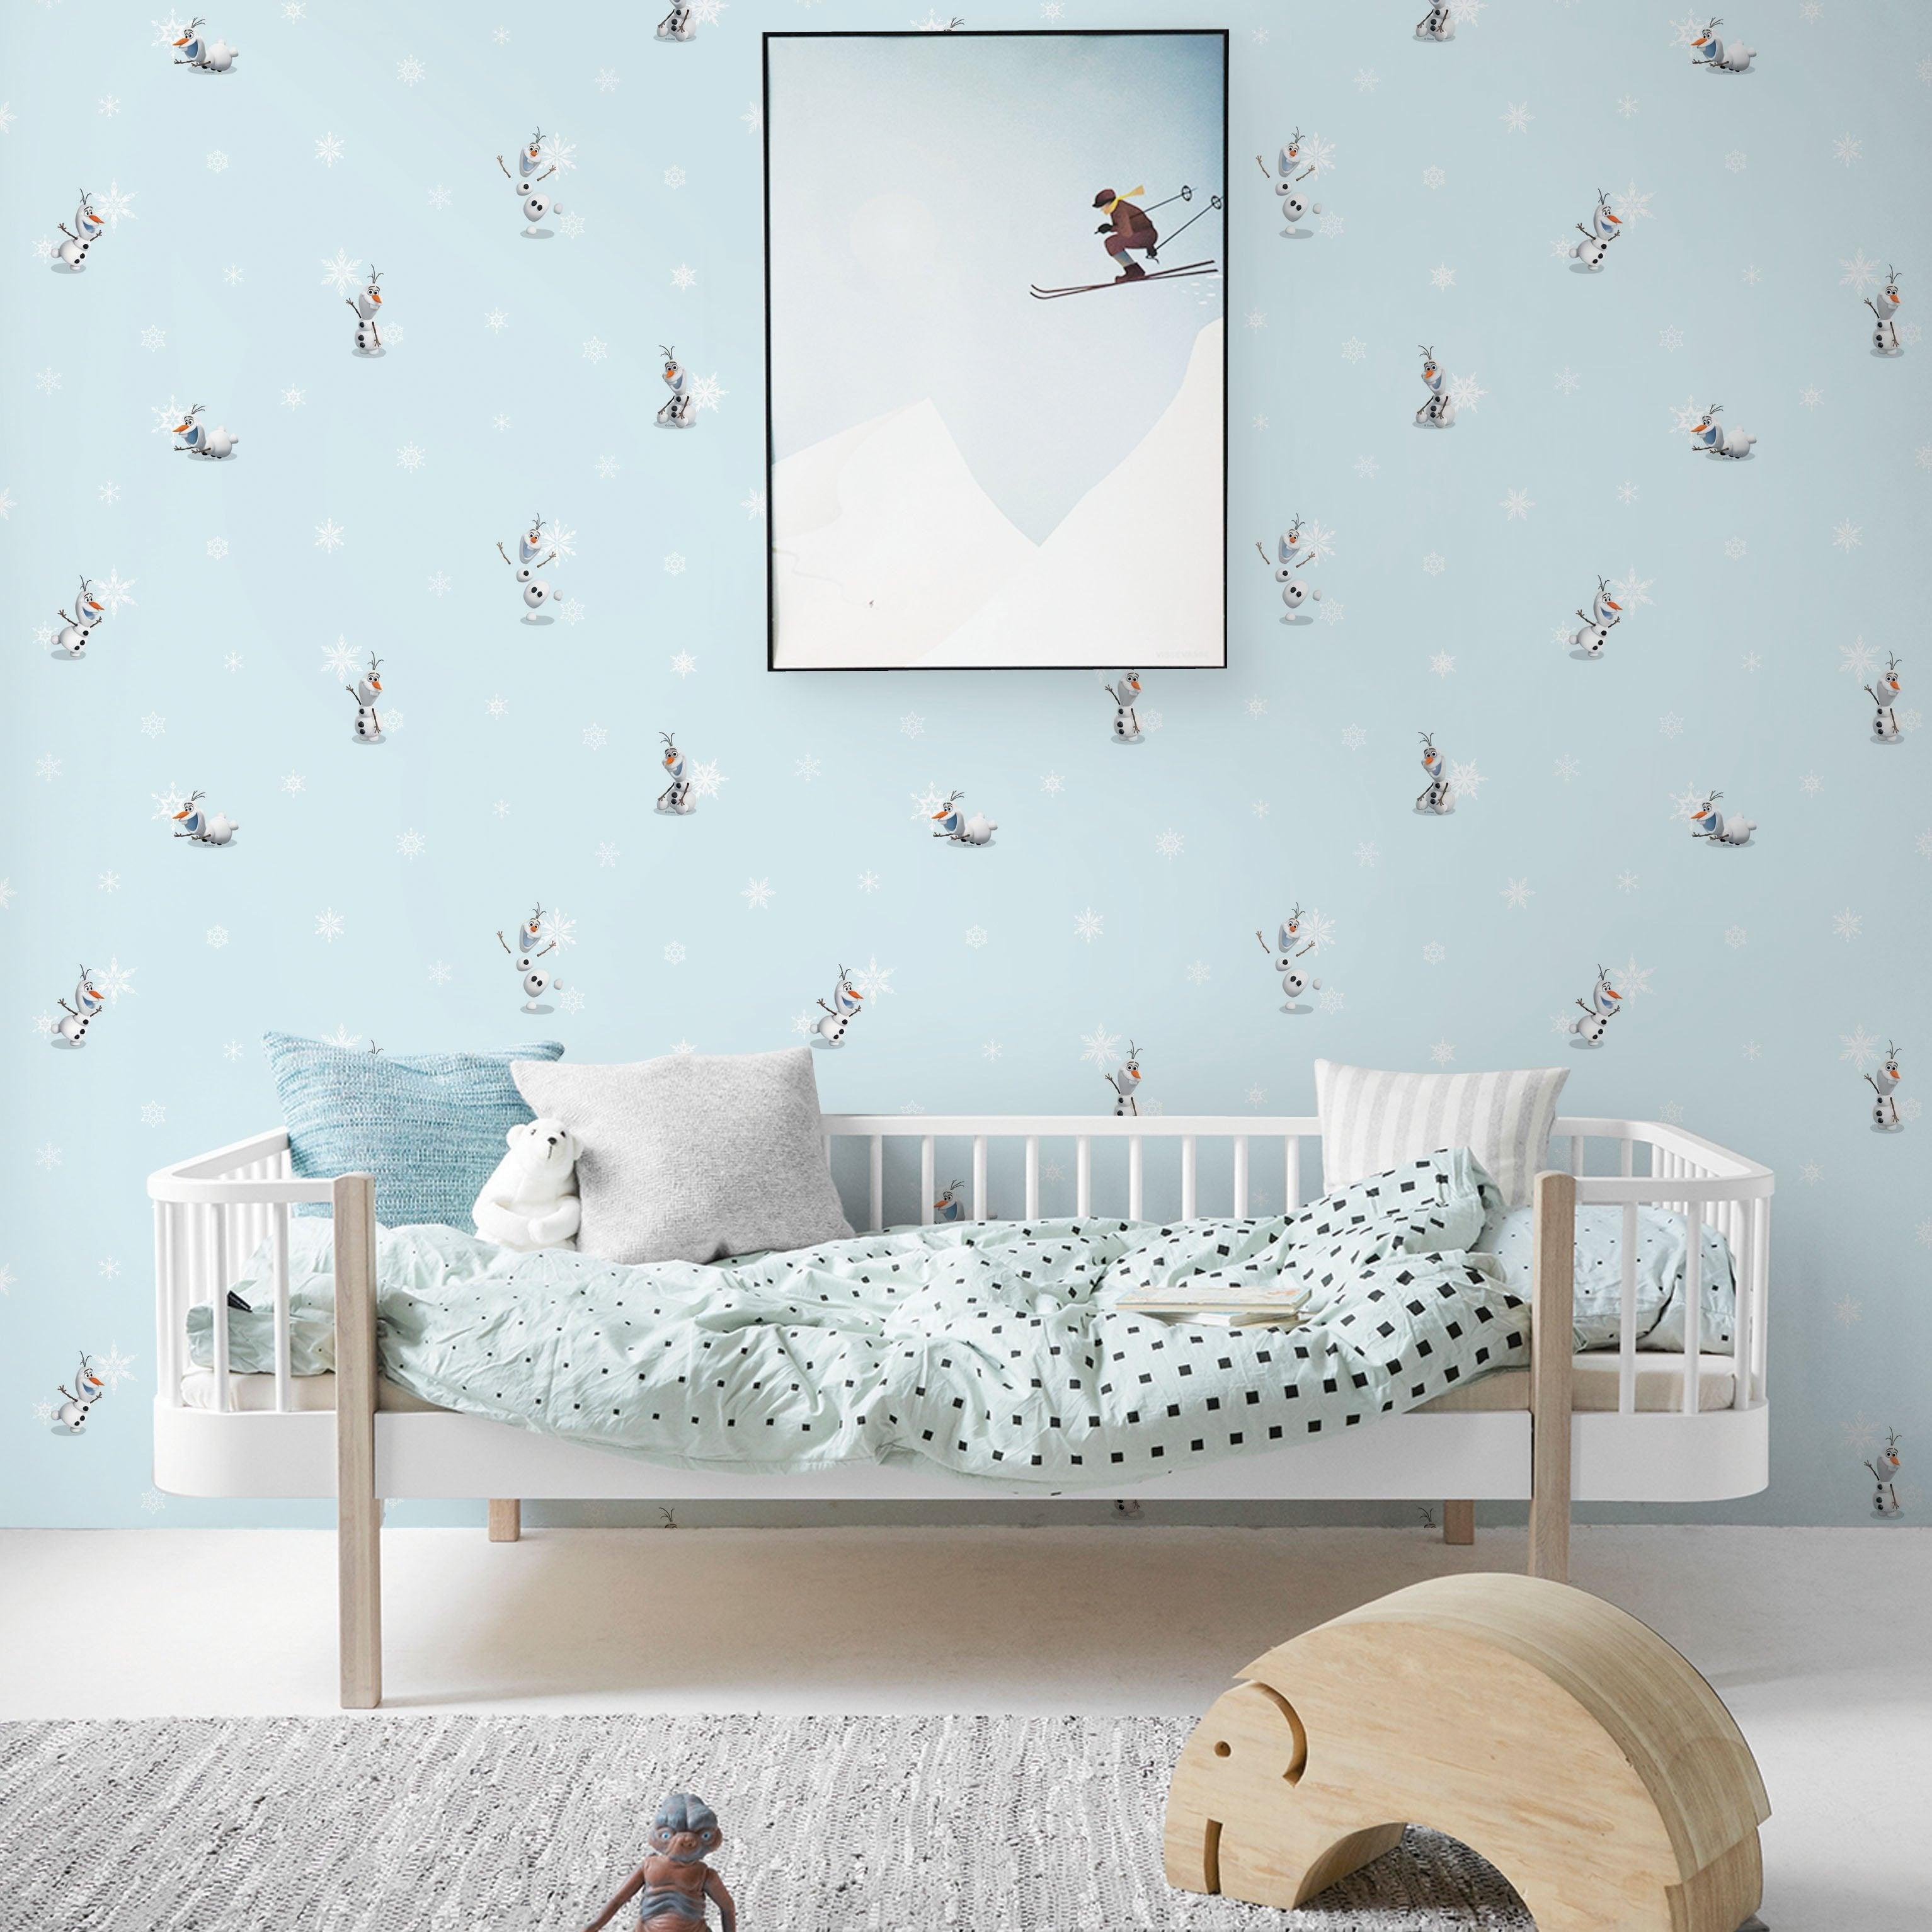 Olaf's World (or Snow Flakes) Wallpaper - Kids Haven